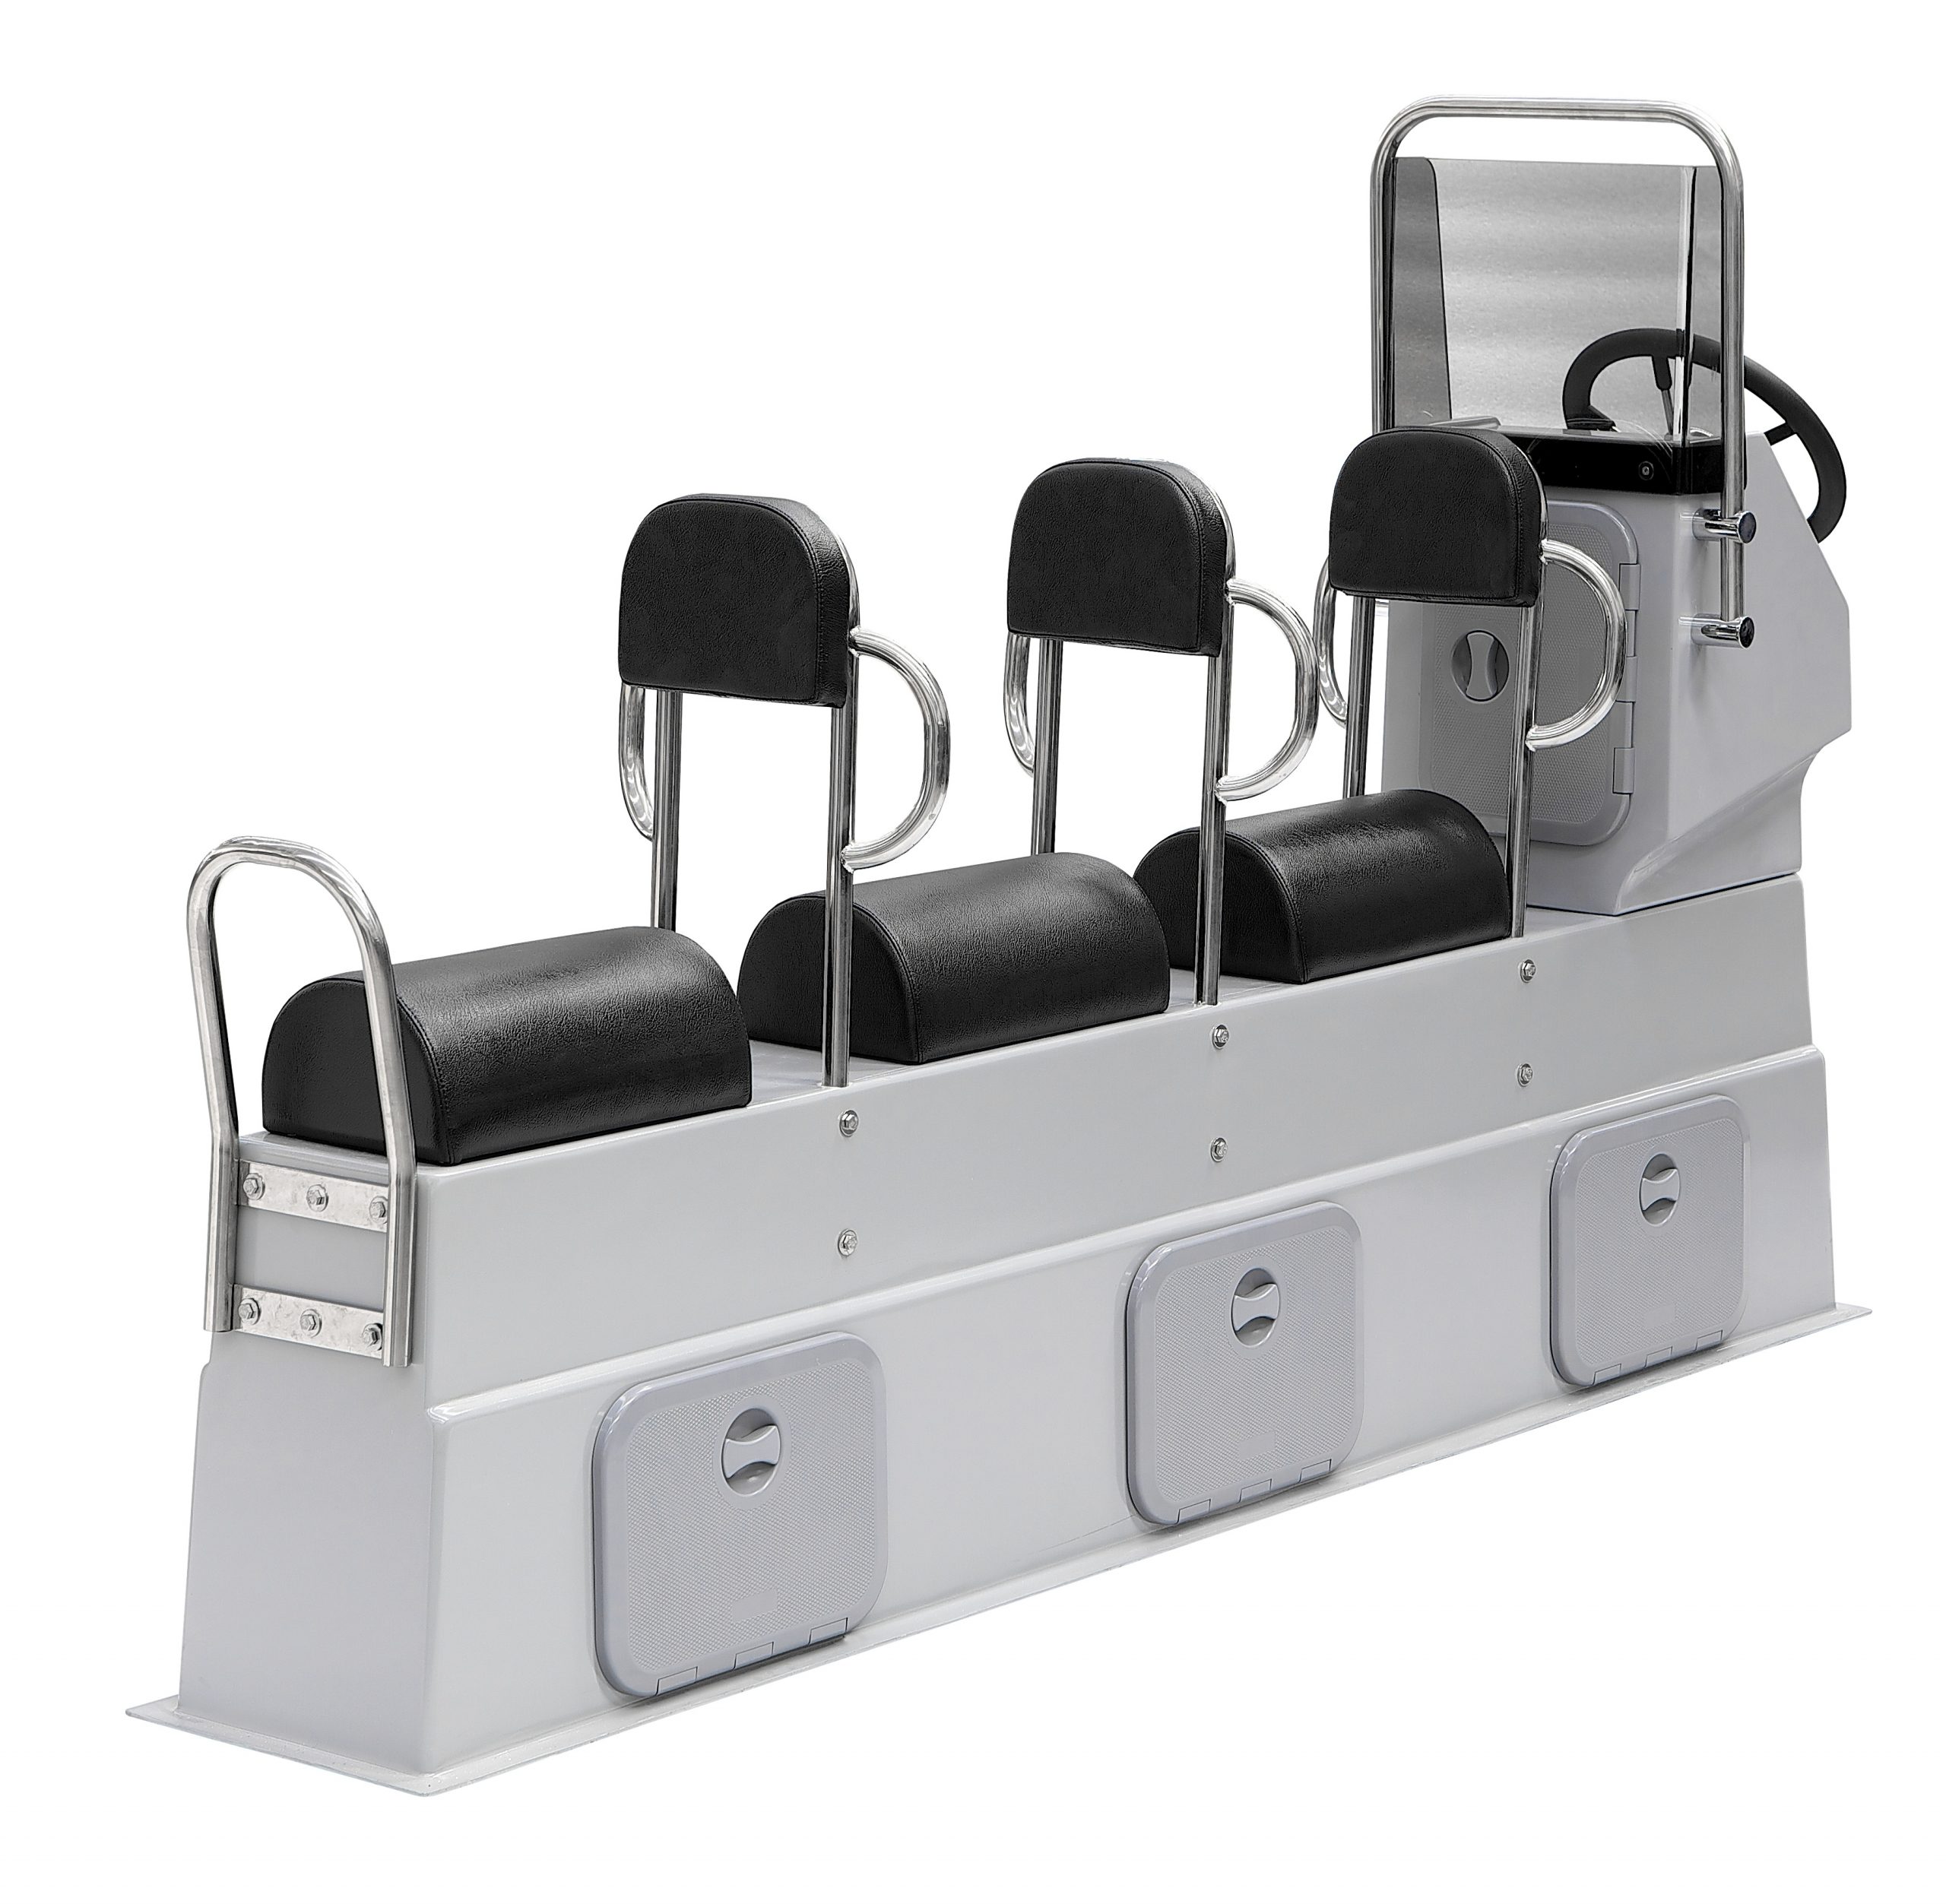 Modular Seat Five Persons